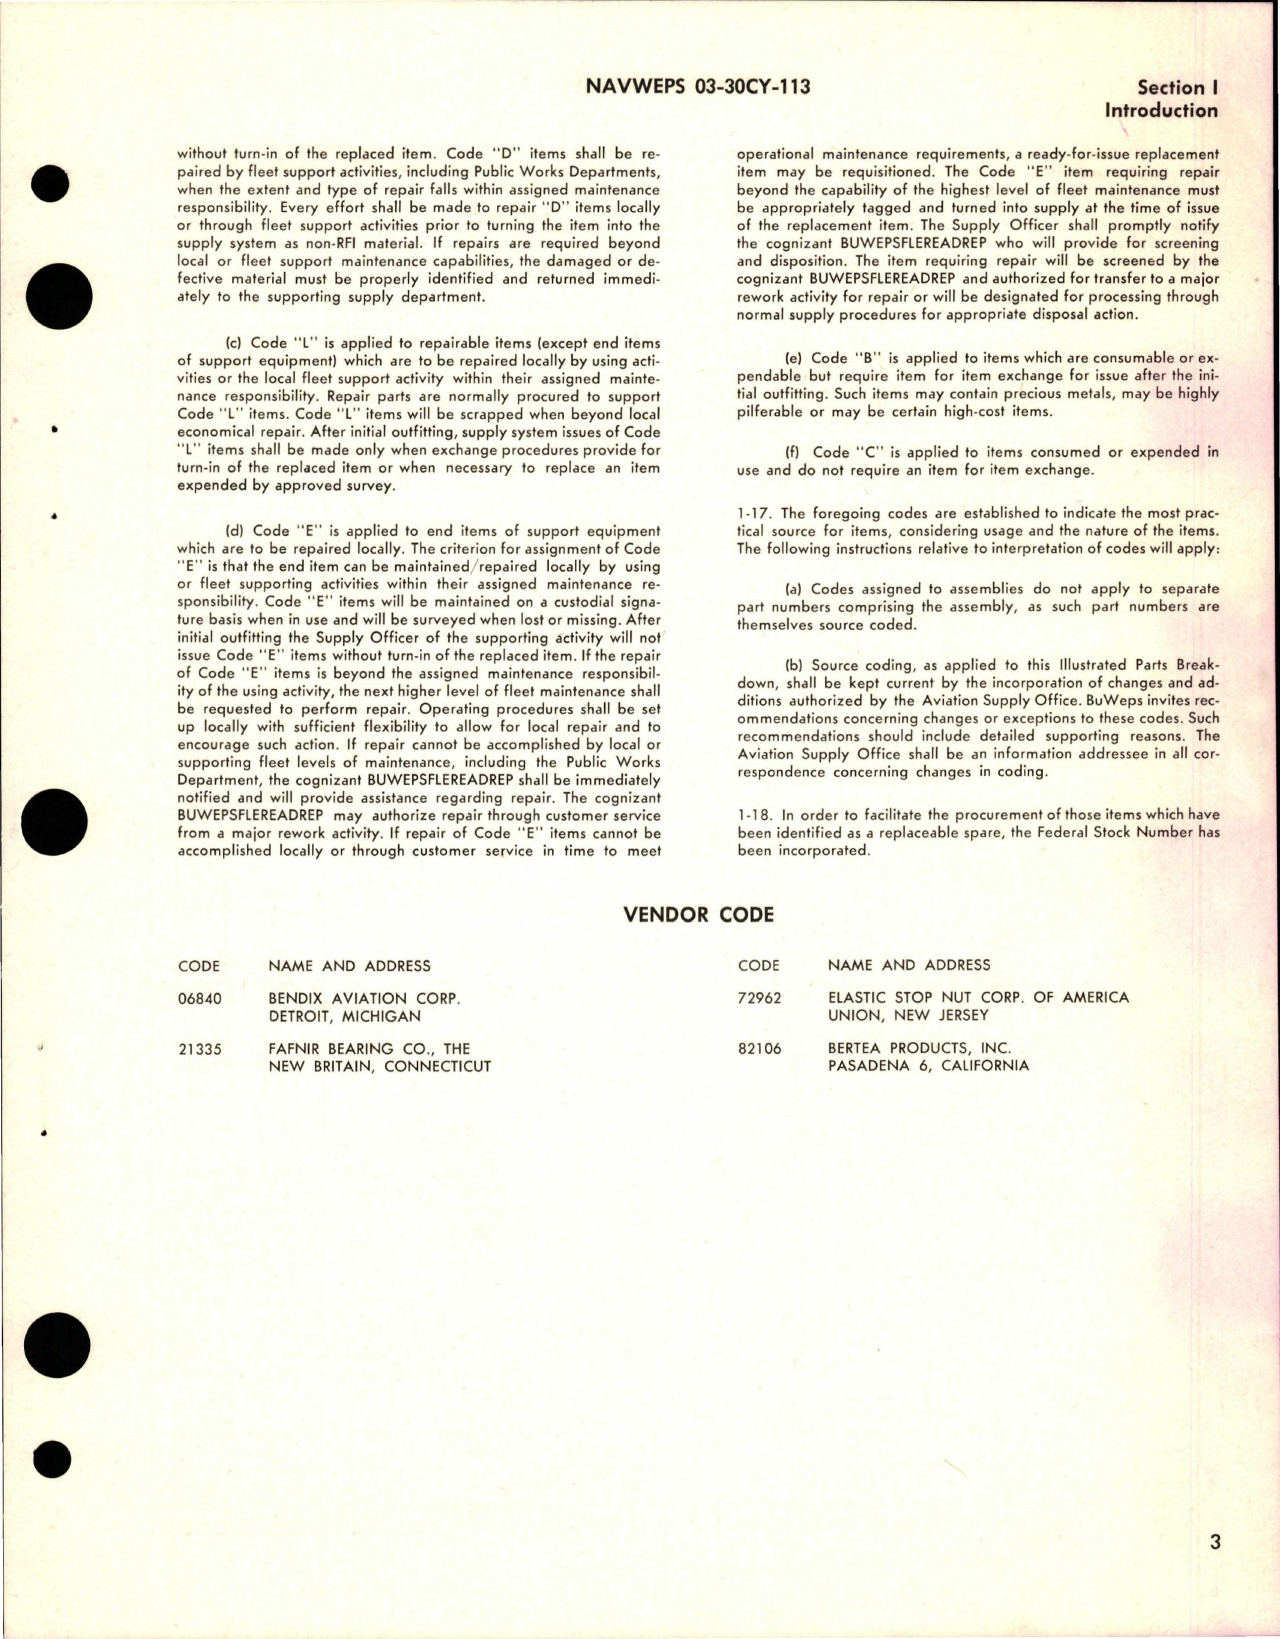 Sample page 5 from AirCorps Library document: Illustrated Parts Breakdown for Elevator Tandem Power Control Mechanism - 5552577 Series